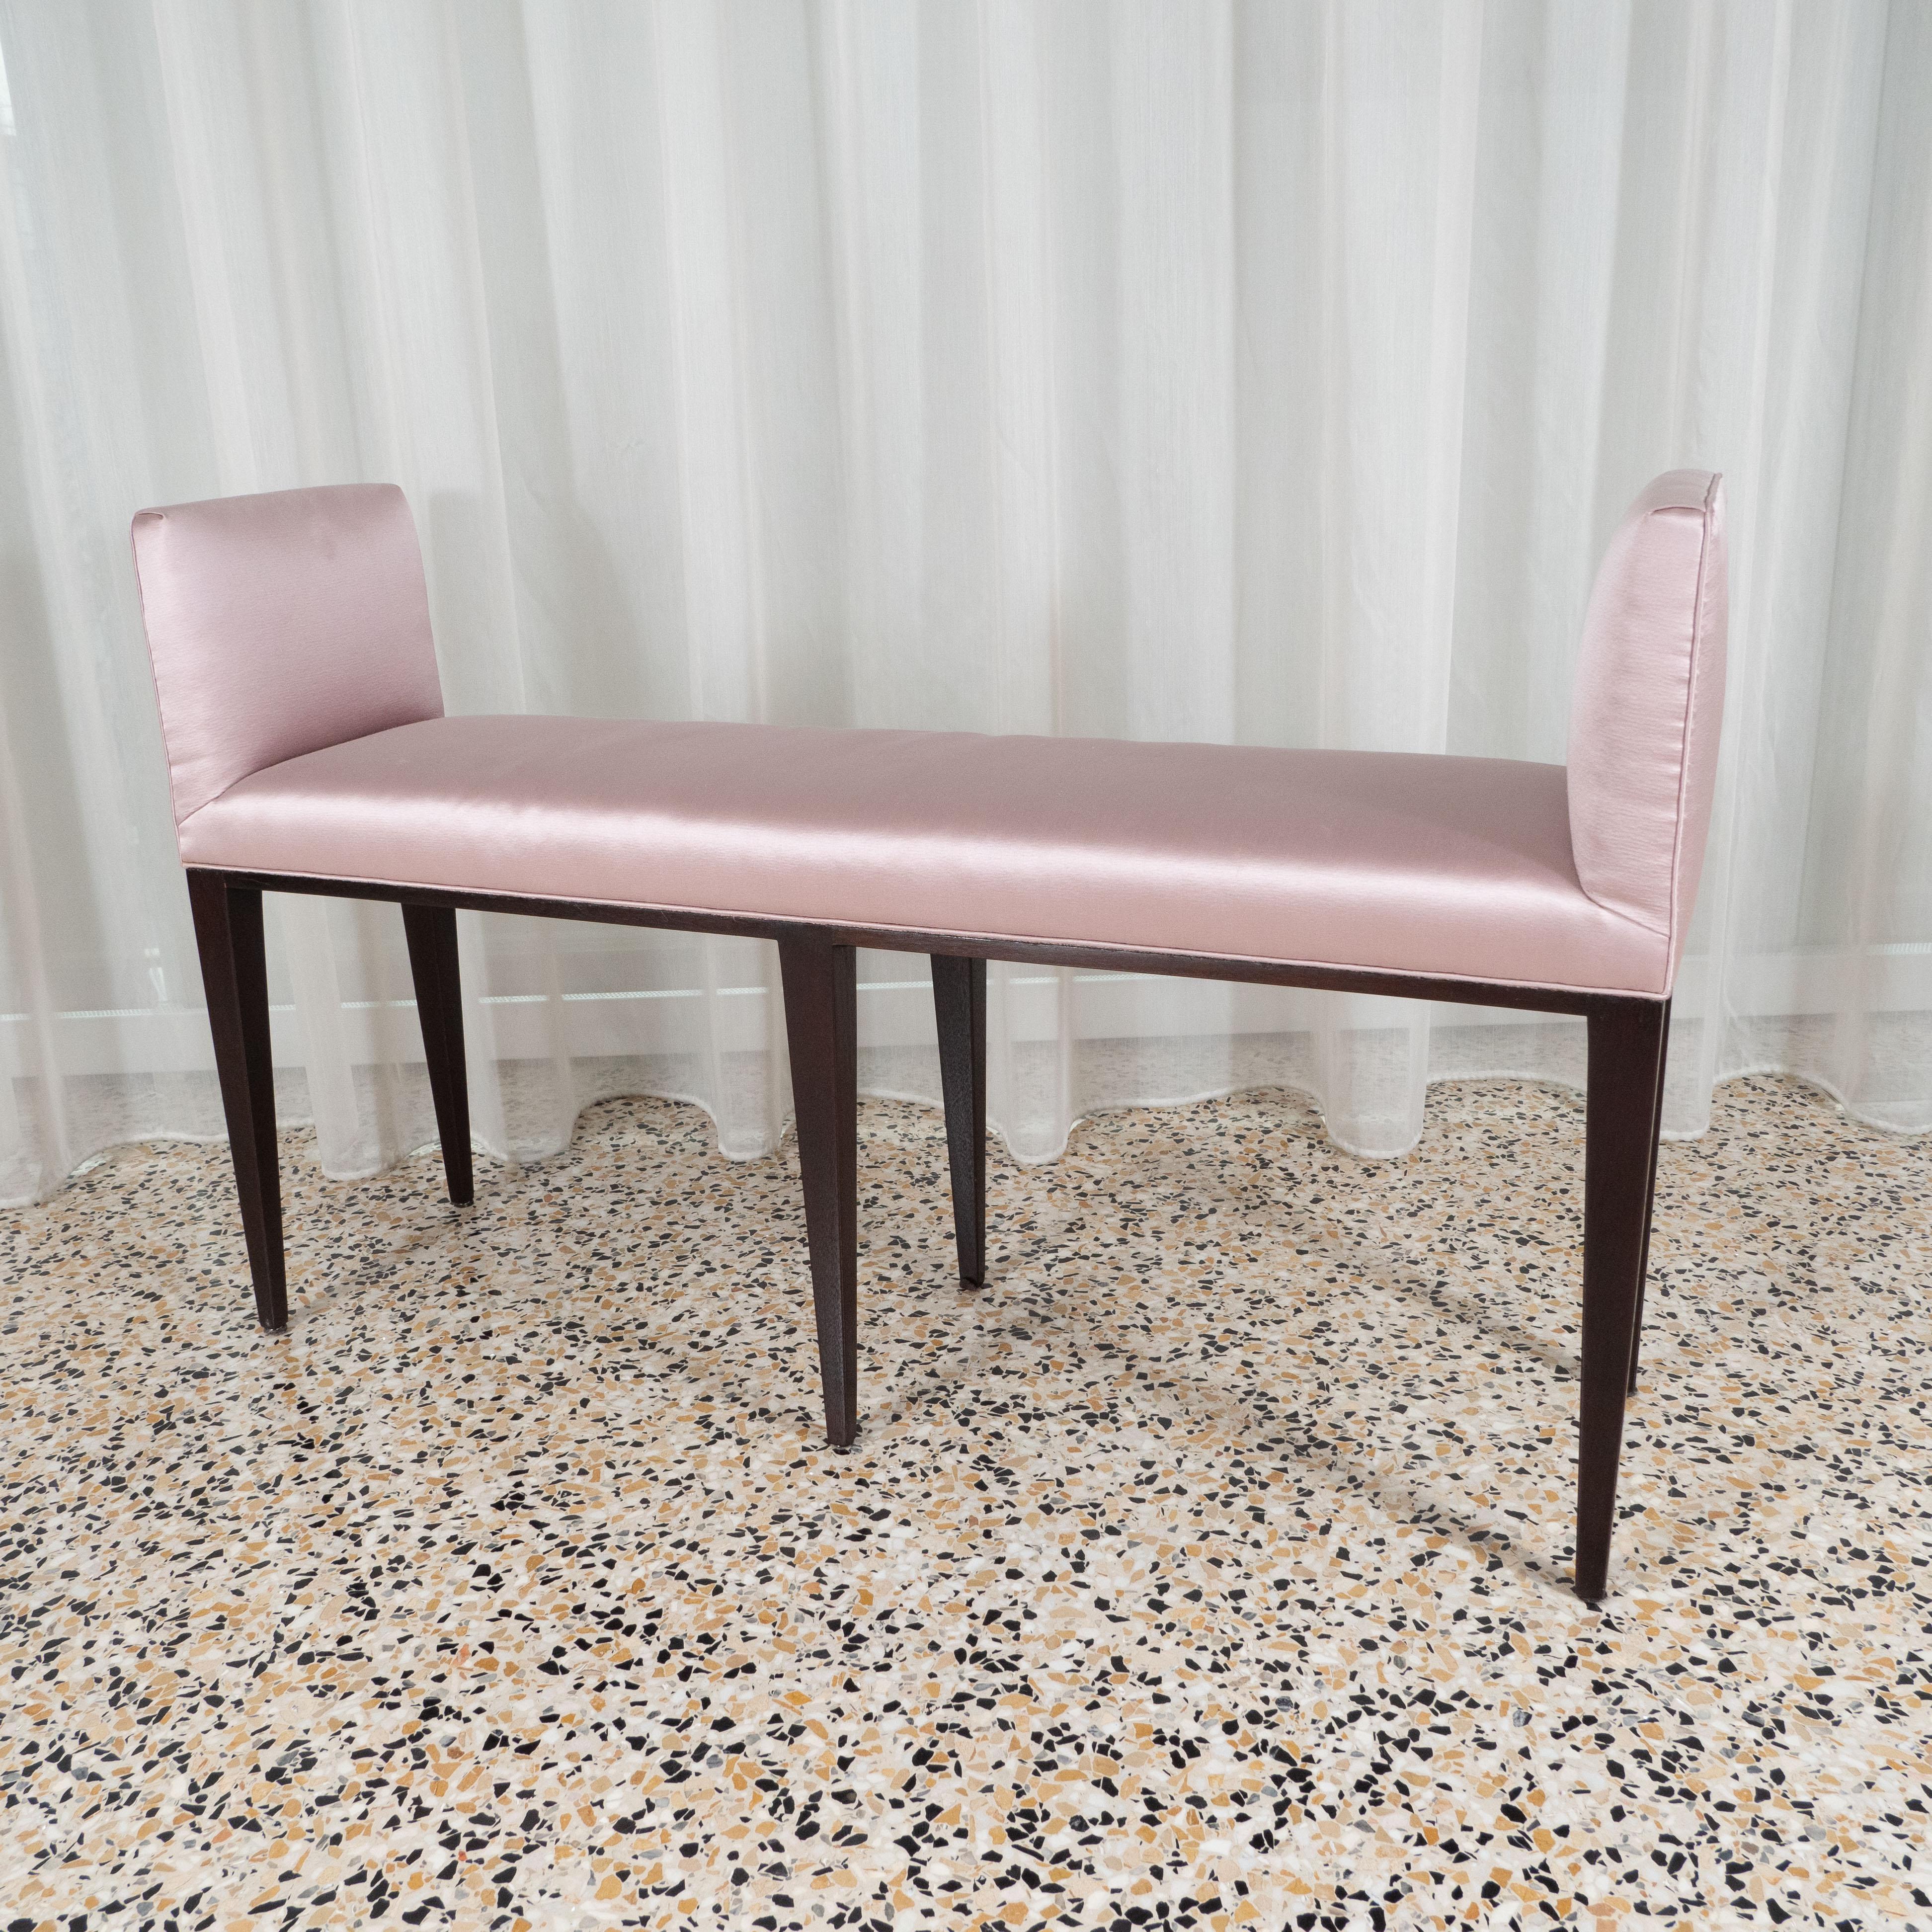 Mid-20th Century French Art Deco Slender Hall Bench in Silk Upholstery